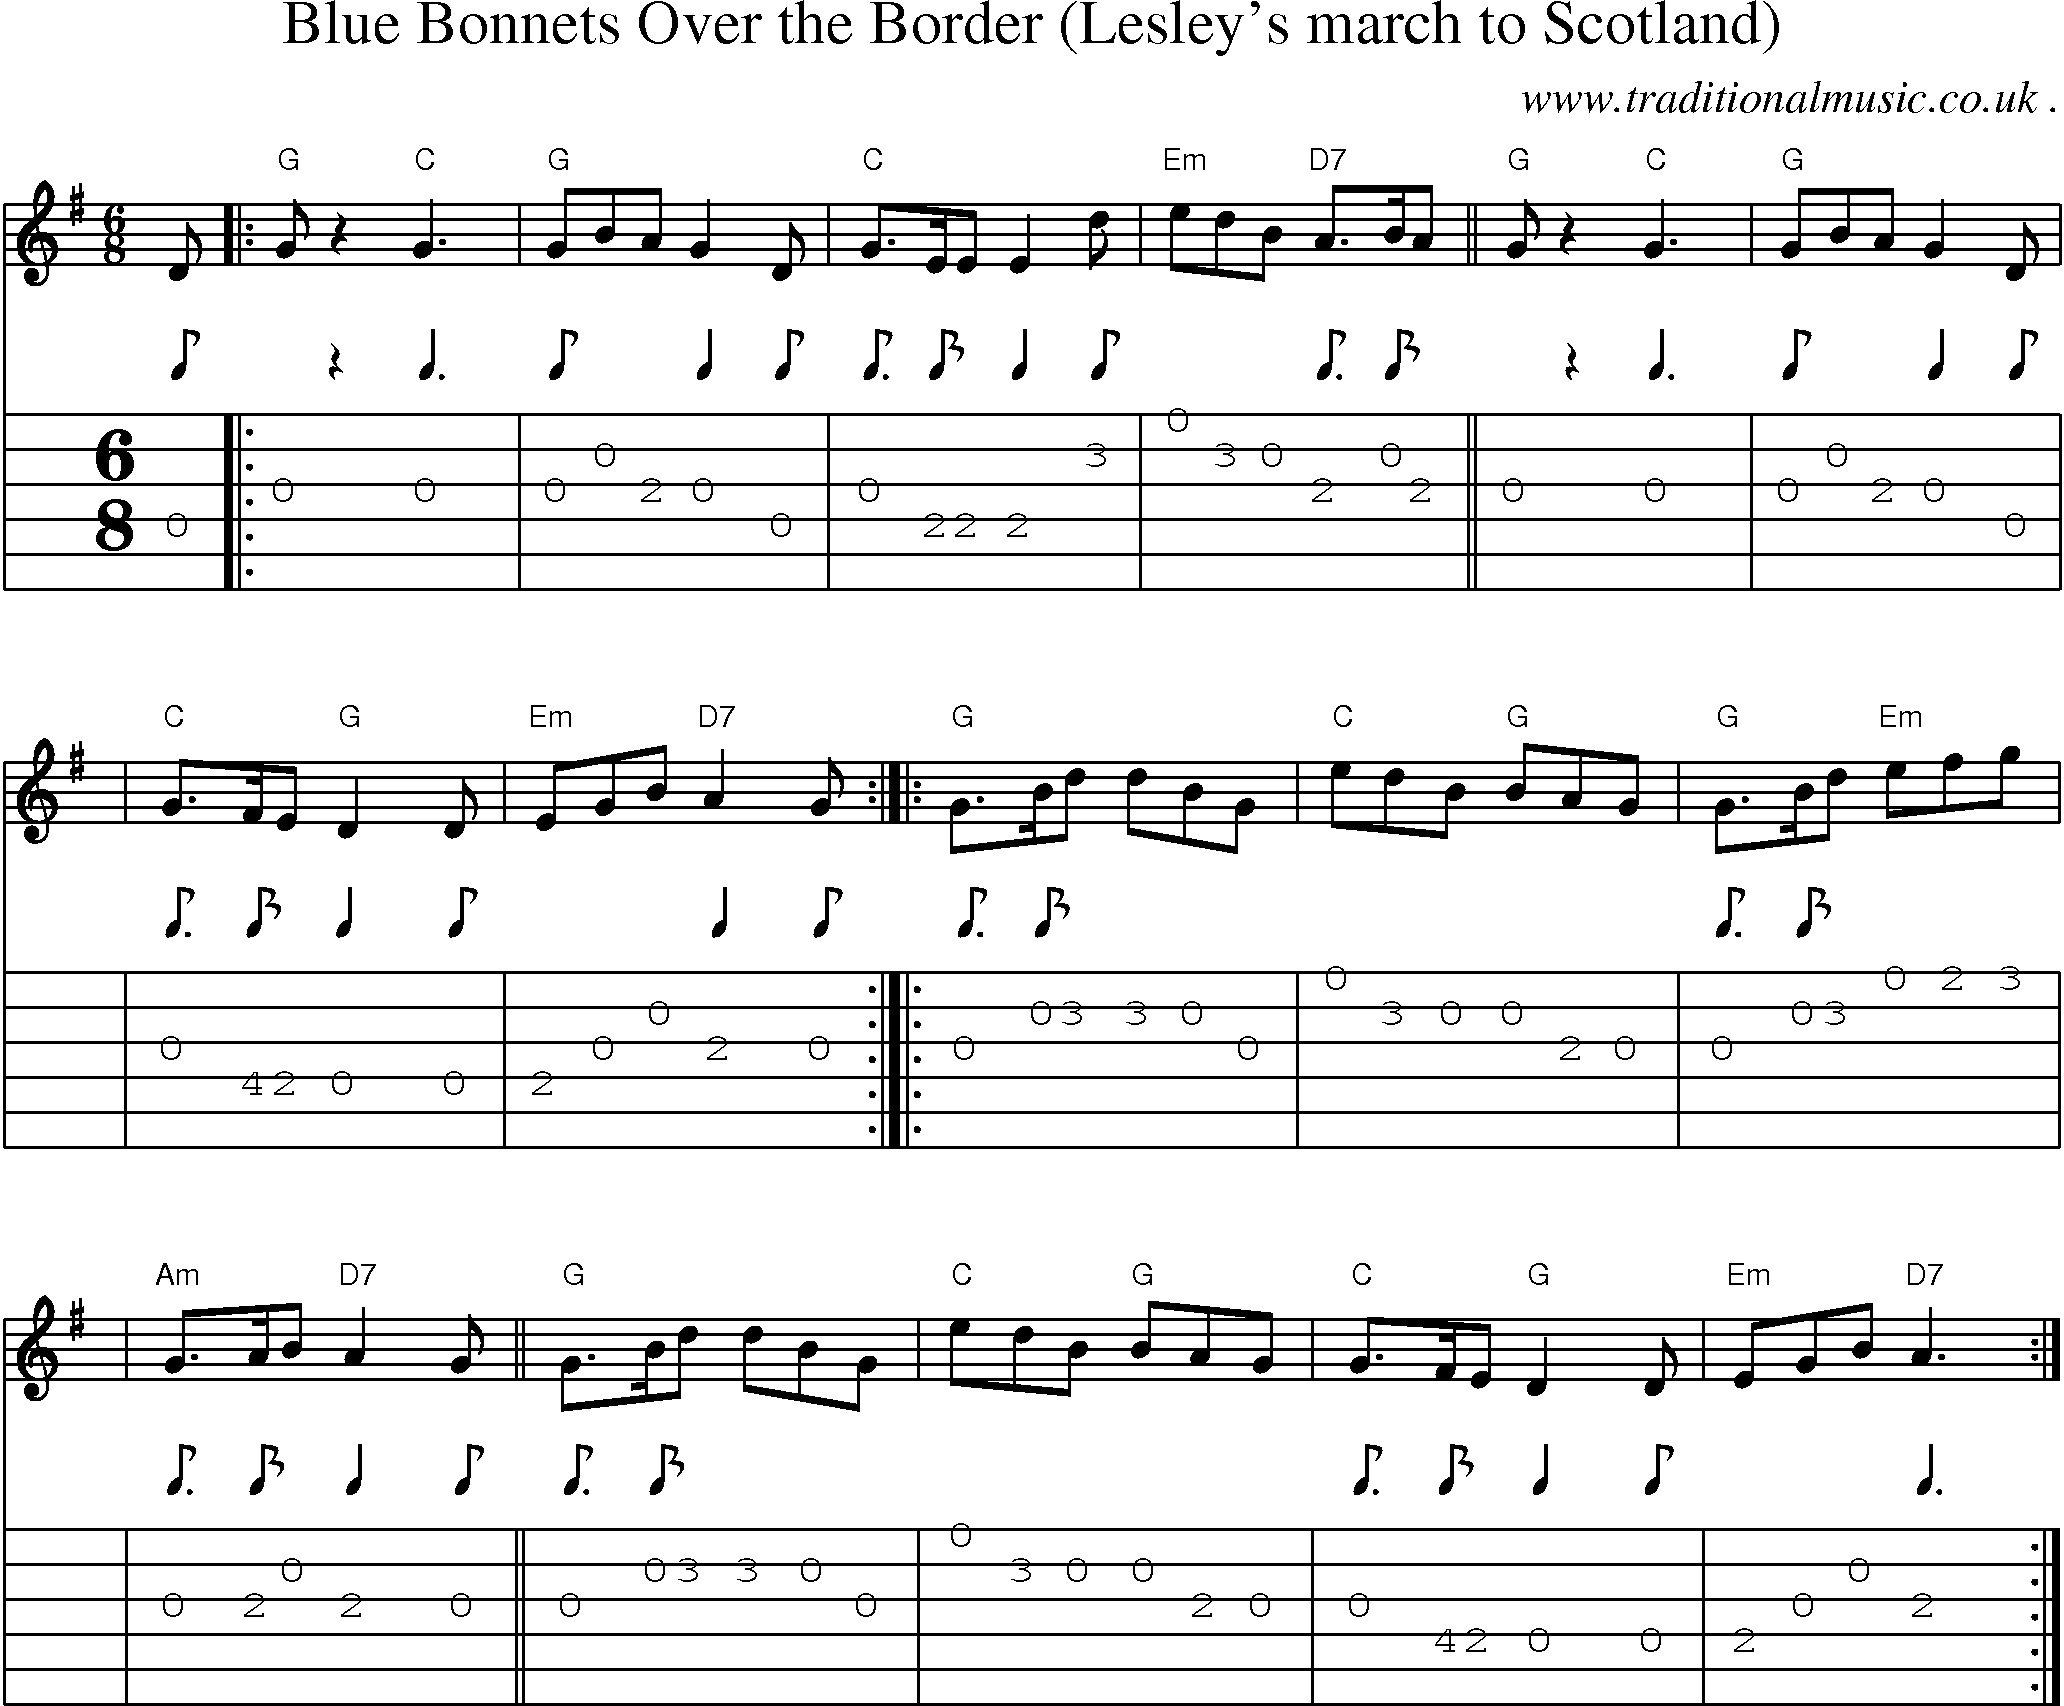 Sheet-music  score, Chords and Guitar Tabs for Blue Bonnets Over The Border Lesleys March To Scotland